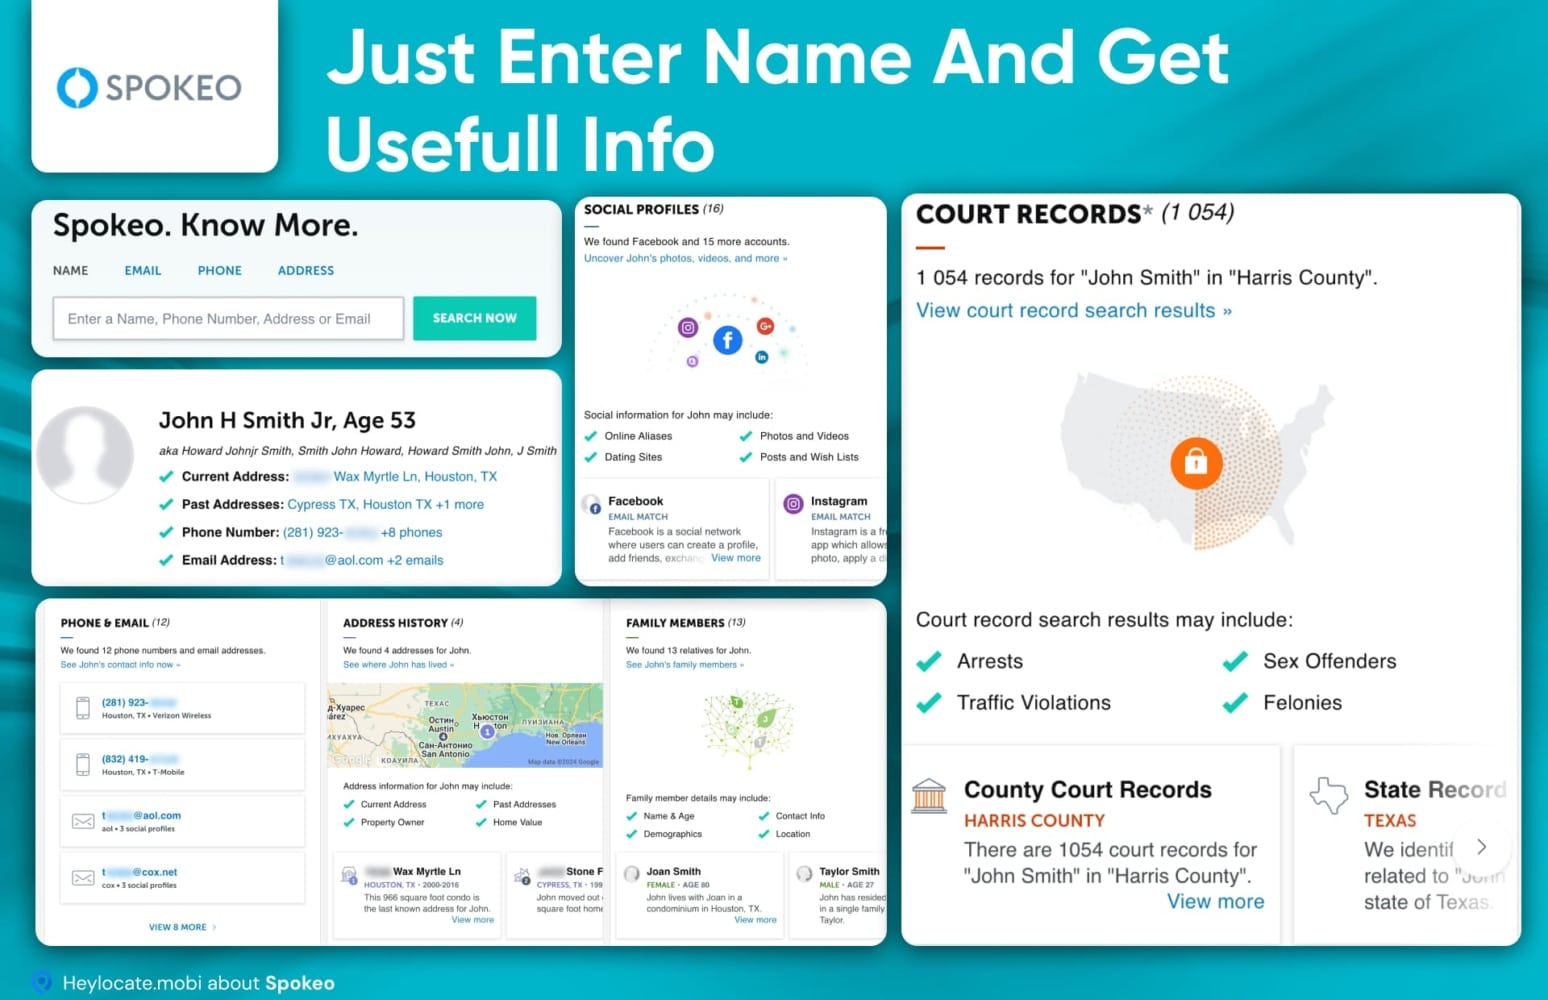 An example search result page on Spokeo, displaying personal information for a person. The page shows verified current and past addresses, phone numbers, email addresses, along with a map indicating location history. Additionally, there are tabs for social profiles, family members, and court records, suggesting comprehensive background information including social media activity and public records. The graphic illustrates how Spokeo compiles various types of data into a detailed profile for individuals being searched.